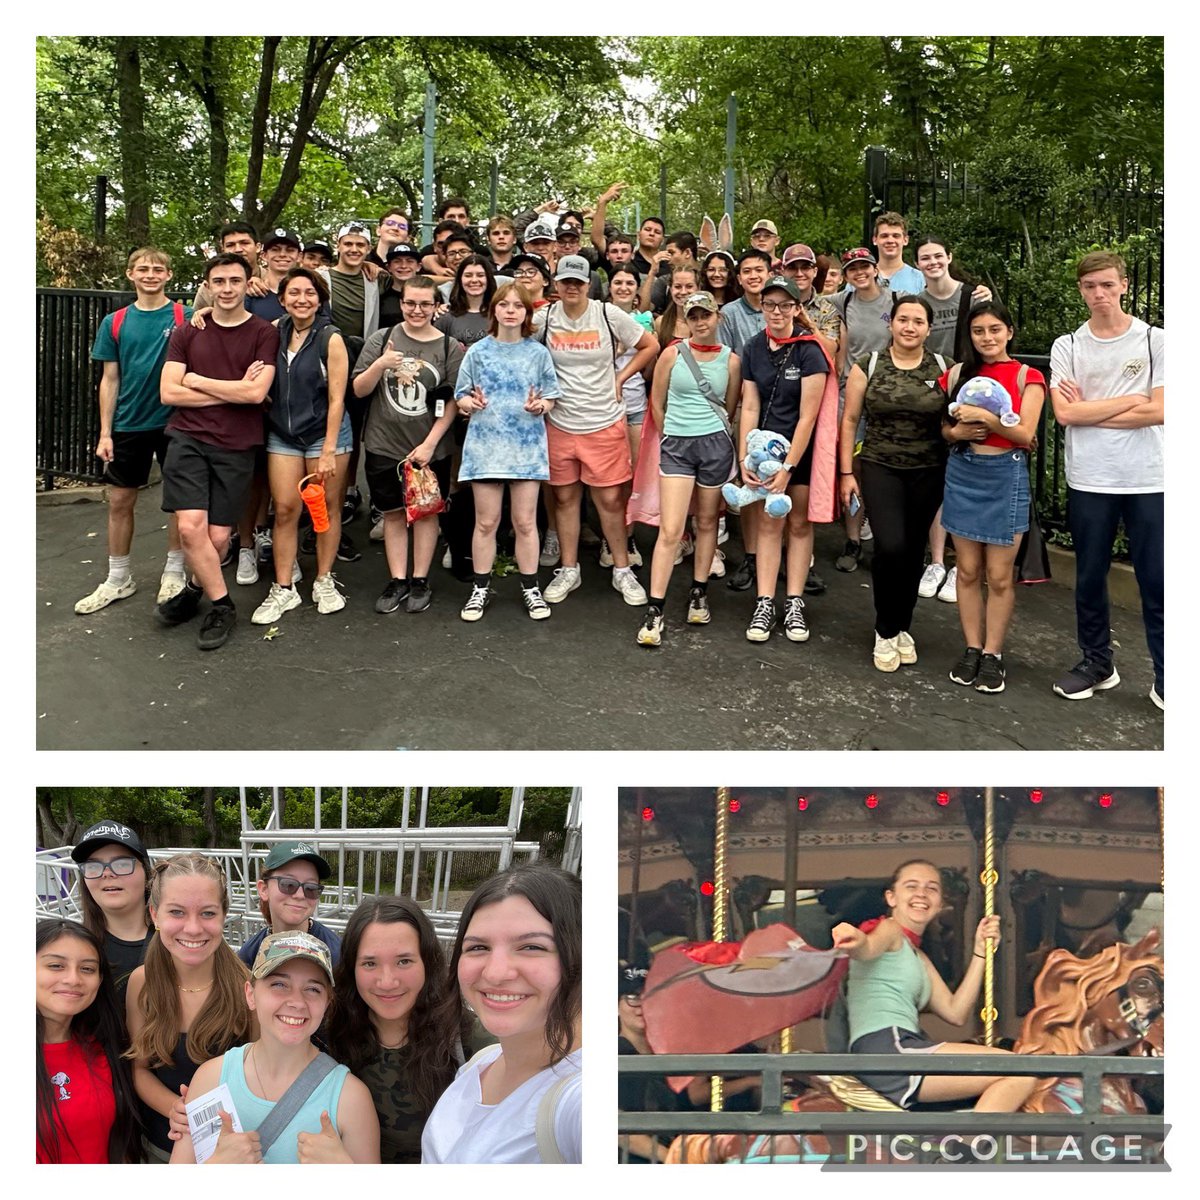 Our Annual AFJROTC trip to Six Flags is in the books and a fun time was had by all. AFJROTC truly is more than just a class..it’s family! @Marcus_HS @MarcusRedNation @MHS9th